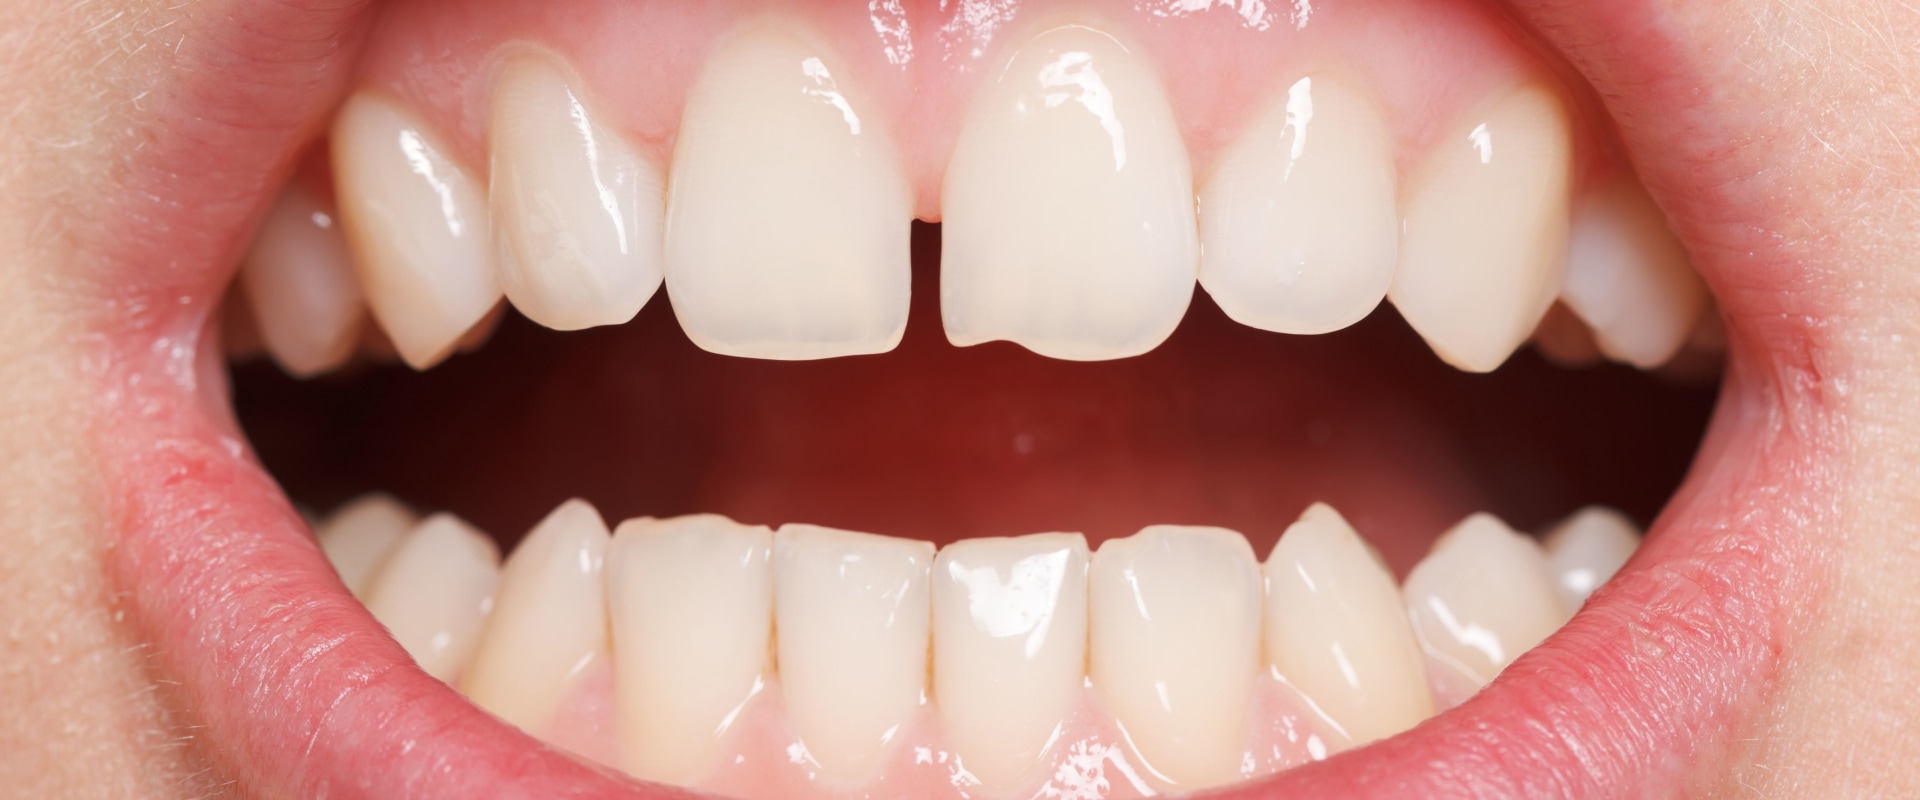 Dental Bonding Results: An Overview of What to Expect